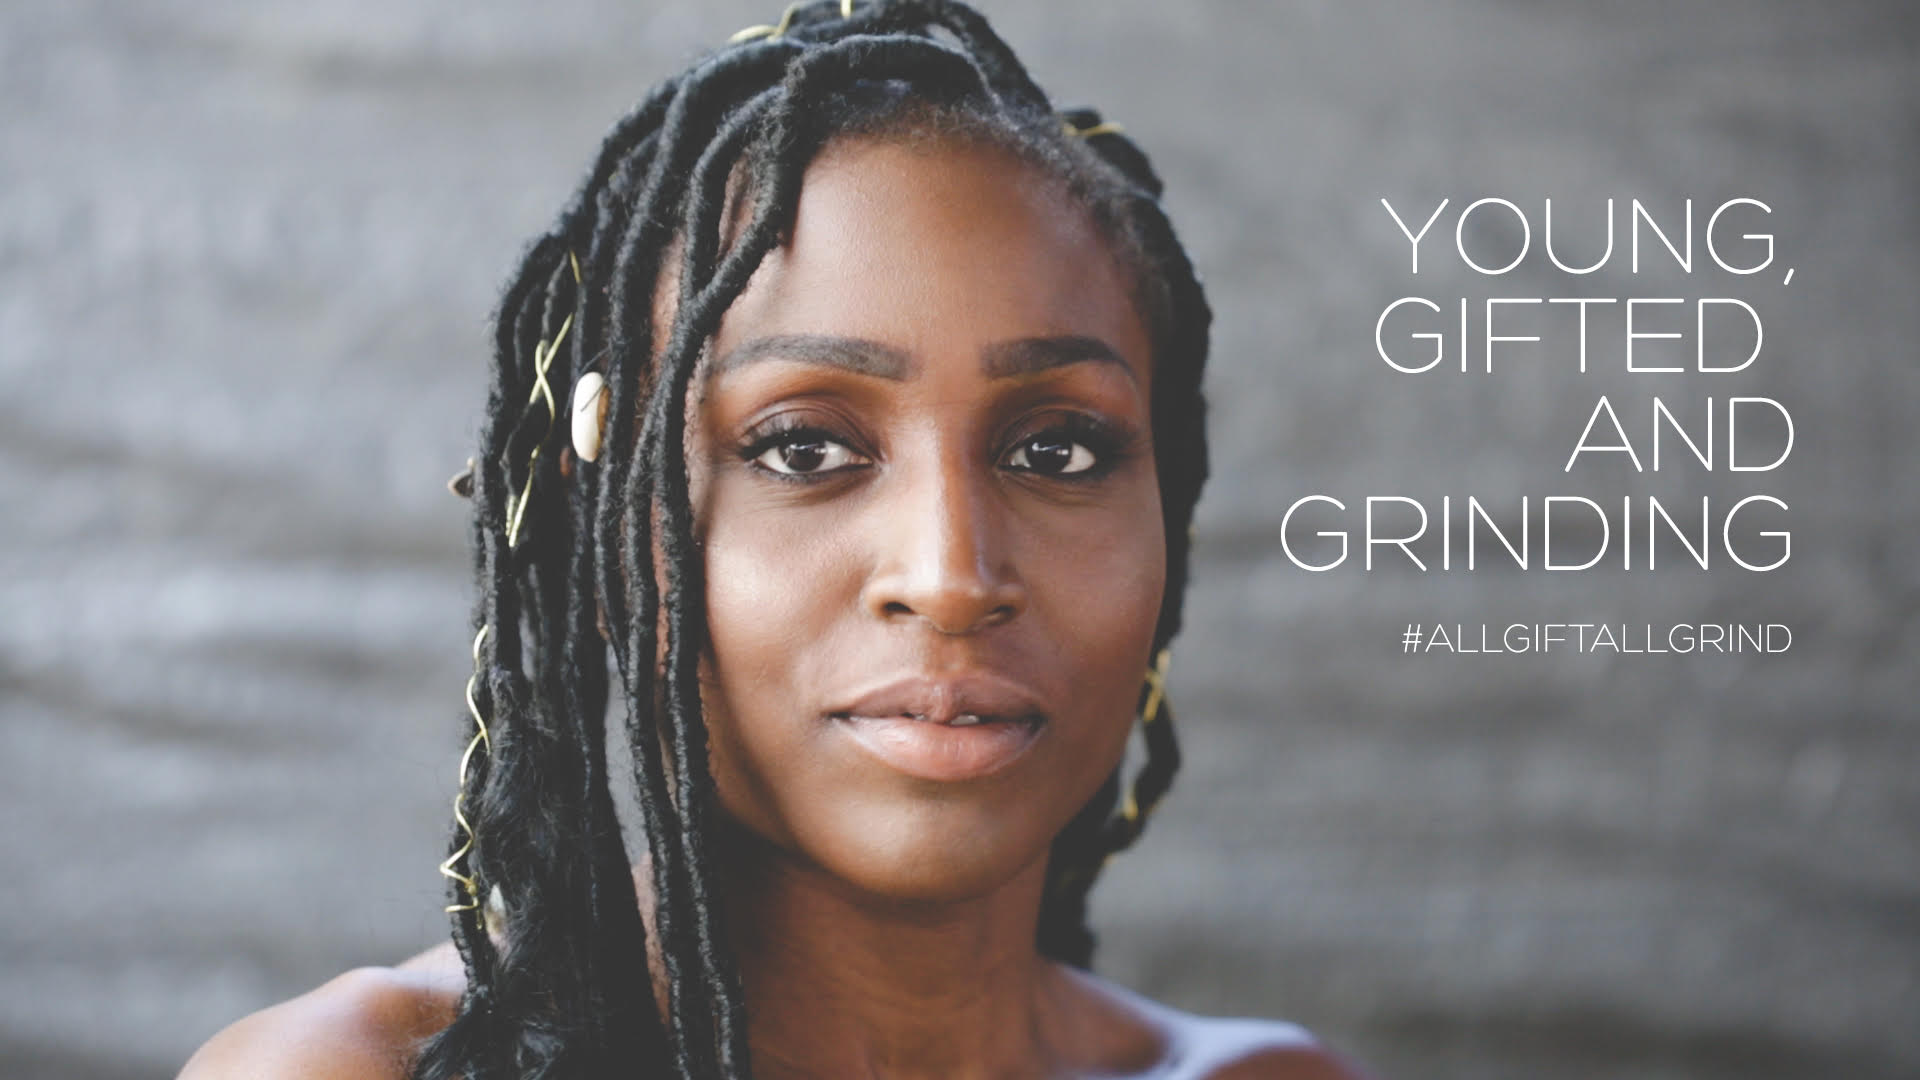 UK – YOUNG, GIFTED AND GRINDING BY NDRIKA ANYIKA